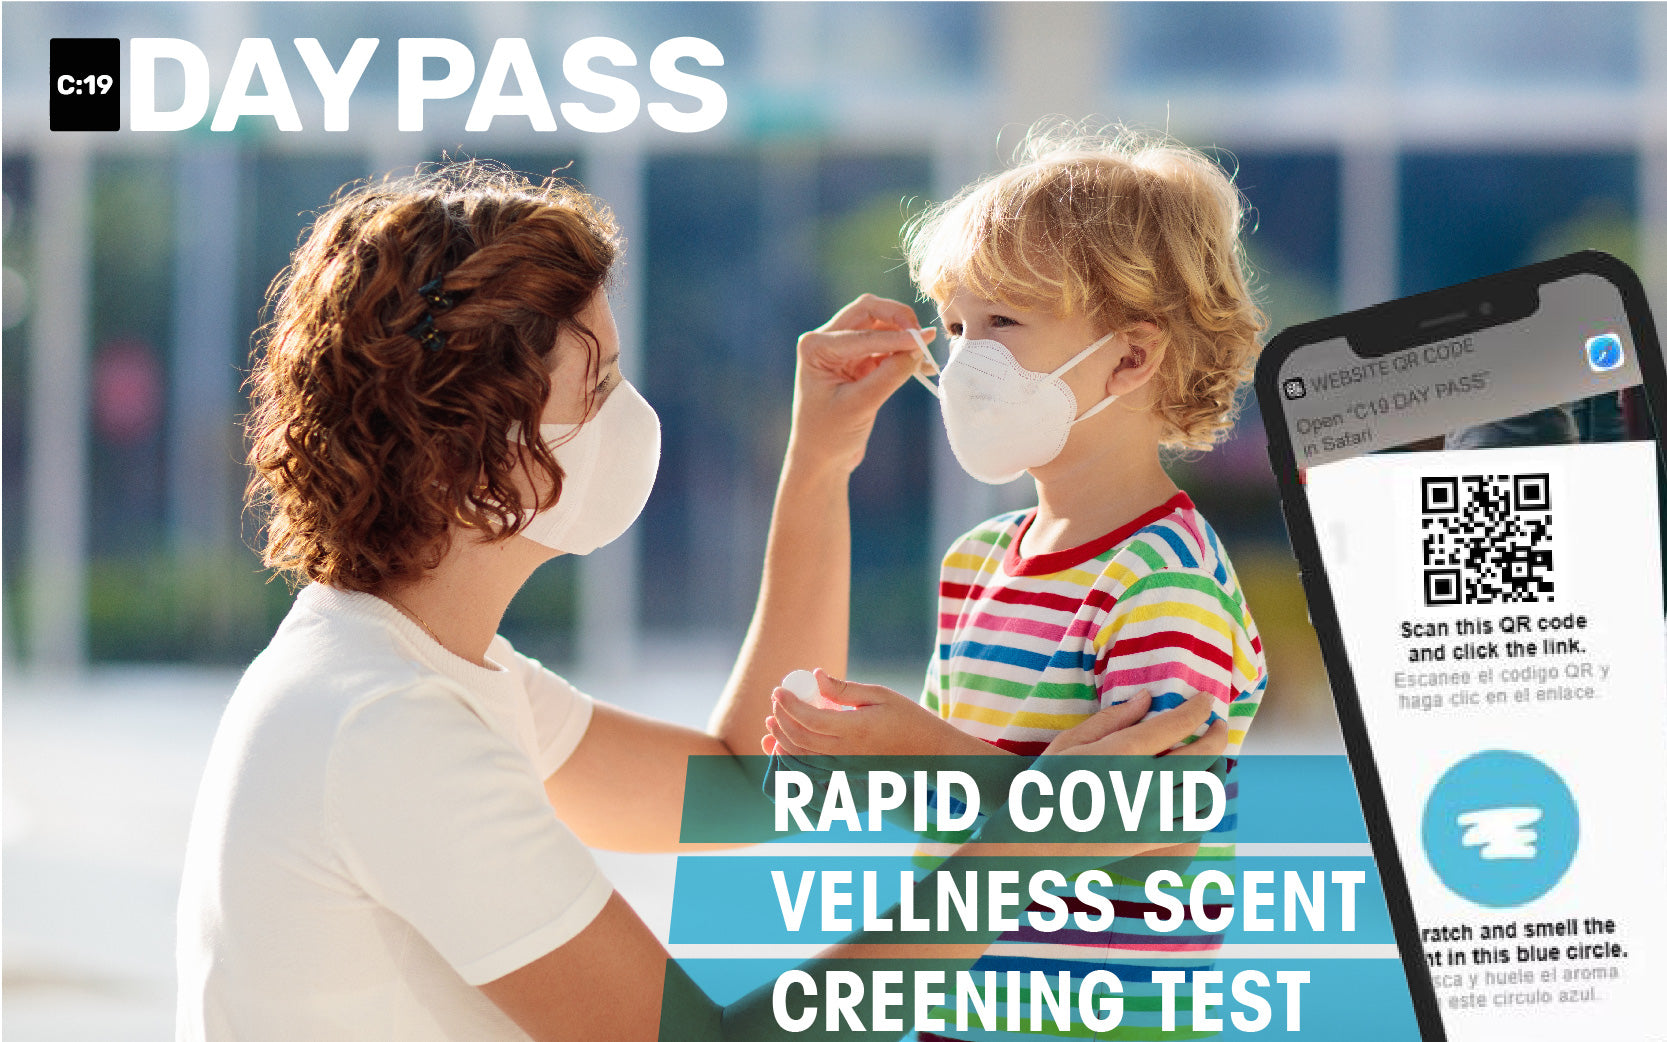 Integrity C-19 Day Pass COVID-19 Smell Test